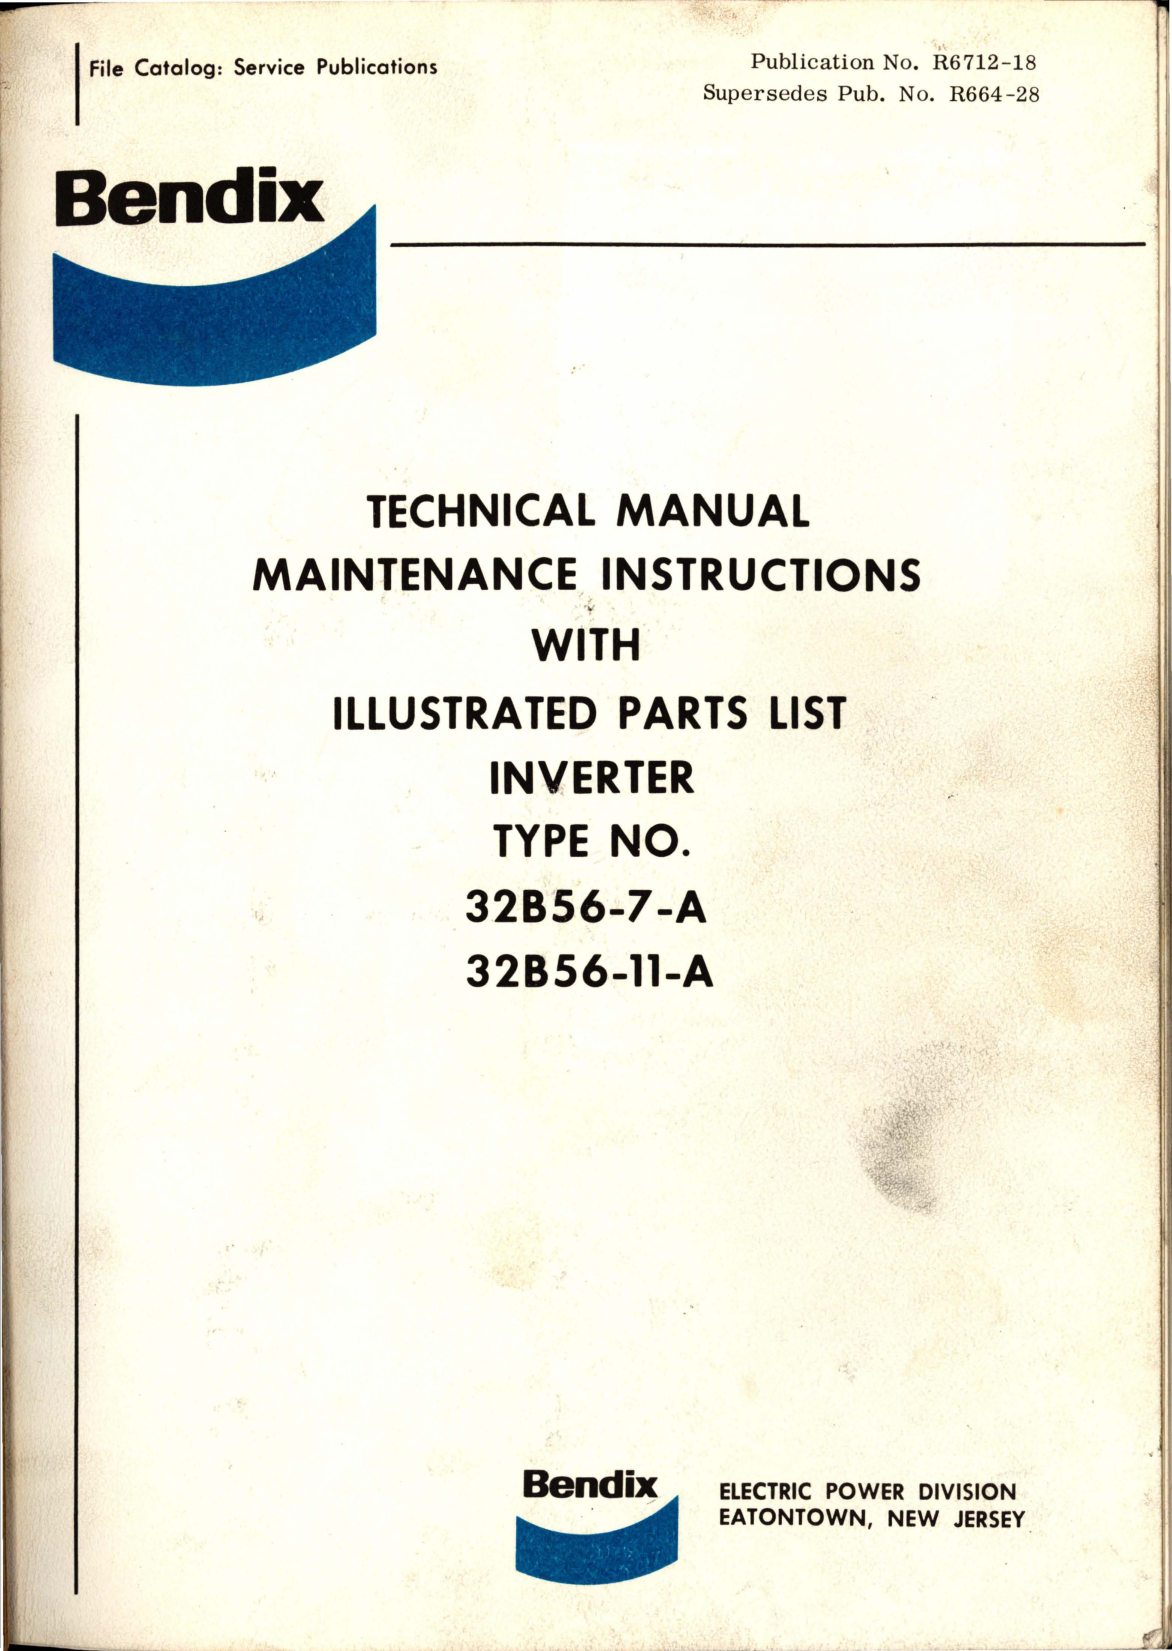 Sample page 1 from AirCorps Library document: Maintenance Instructions with Illustrated Parts List for Inverter - Type 32B56-7-A and 32B56-11-A